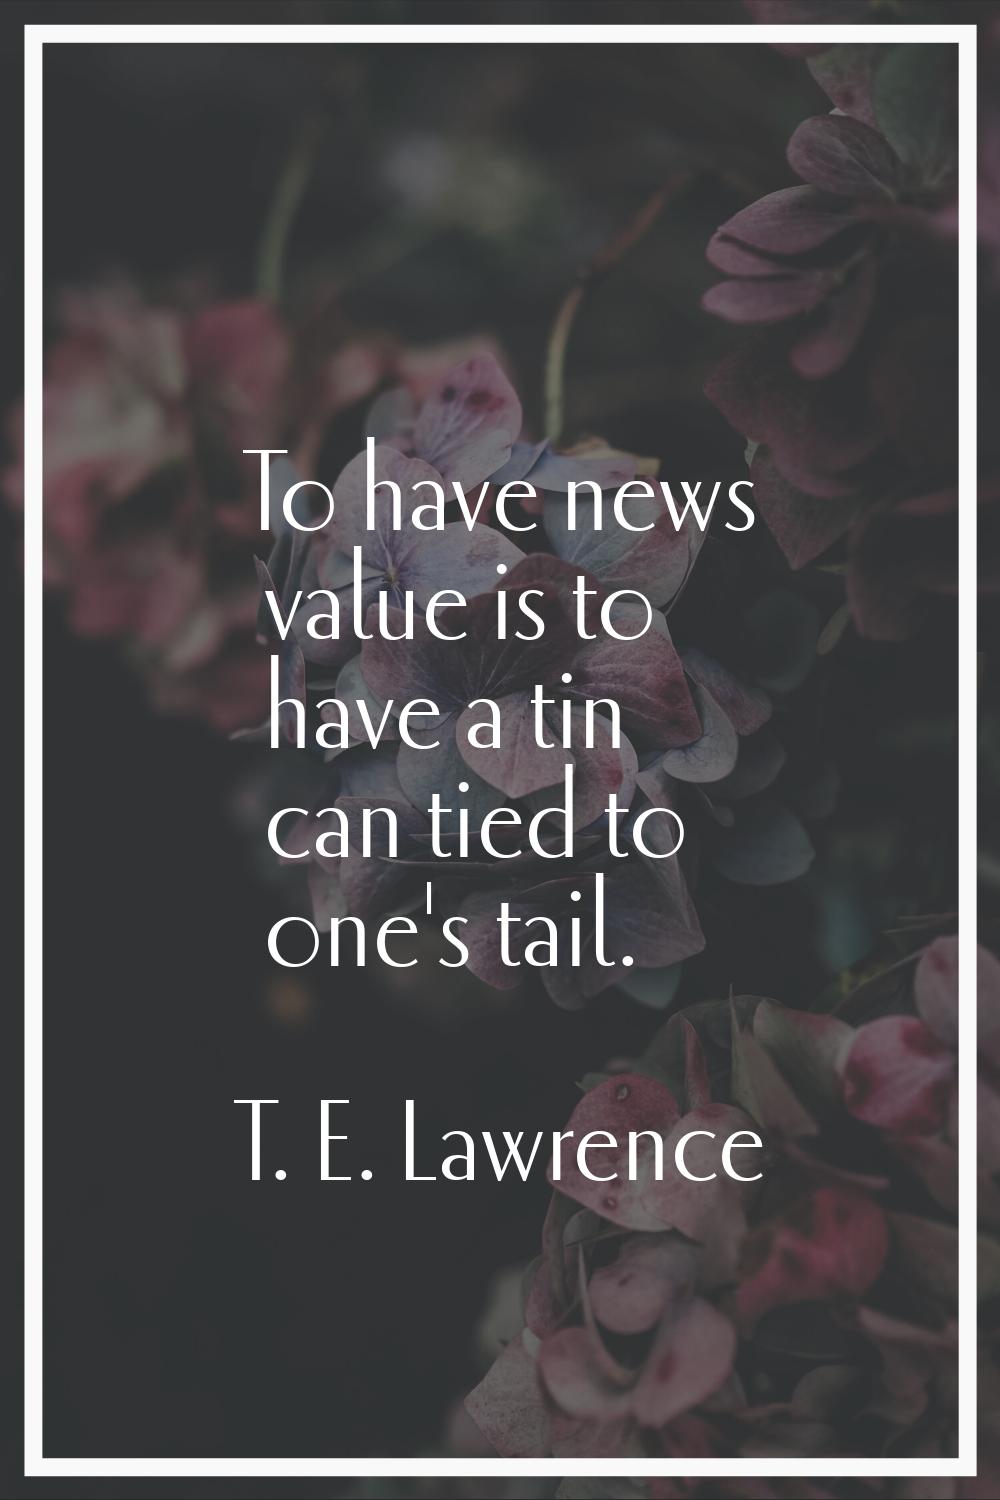 To have news value is to have a tin can tied to one's tail.